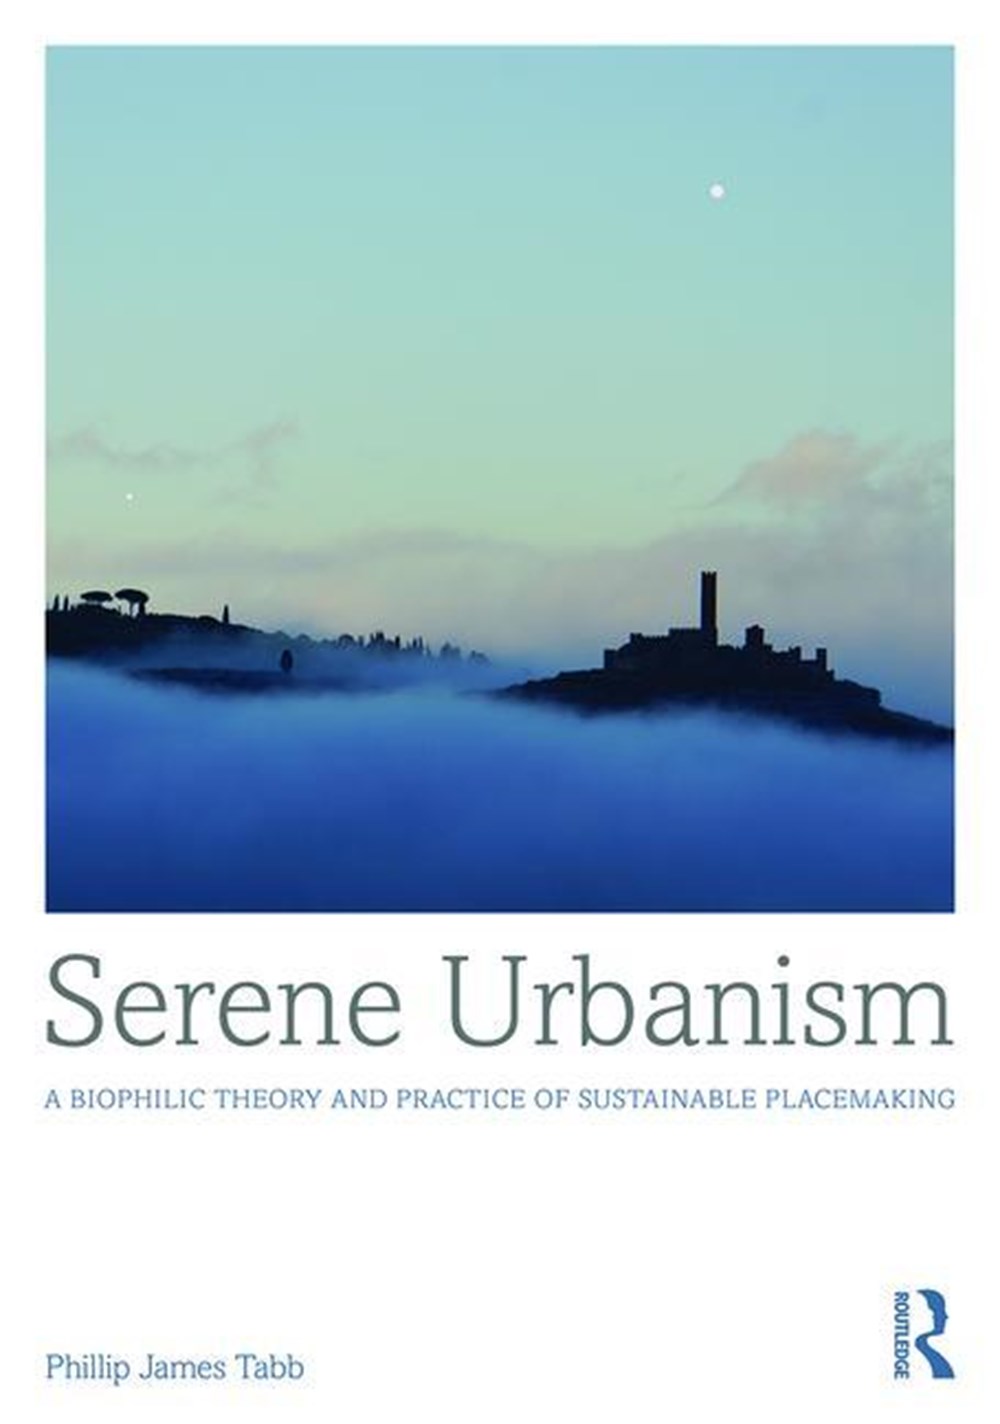 Serene Urbanism: A Biophilic Theory and Practice of Sustainable Placemaking